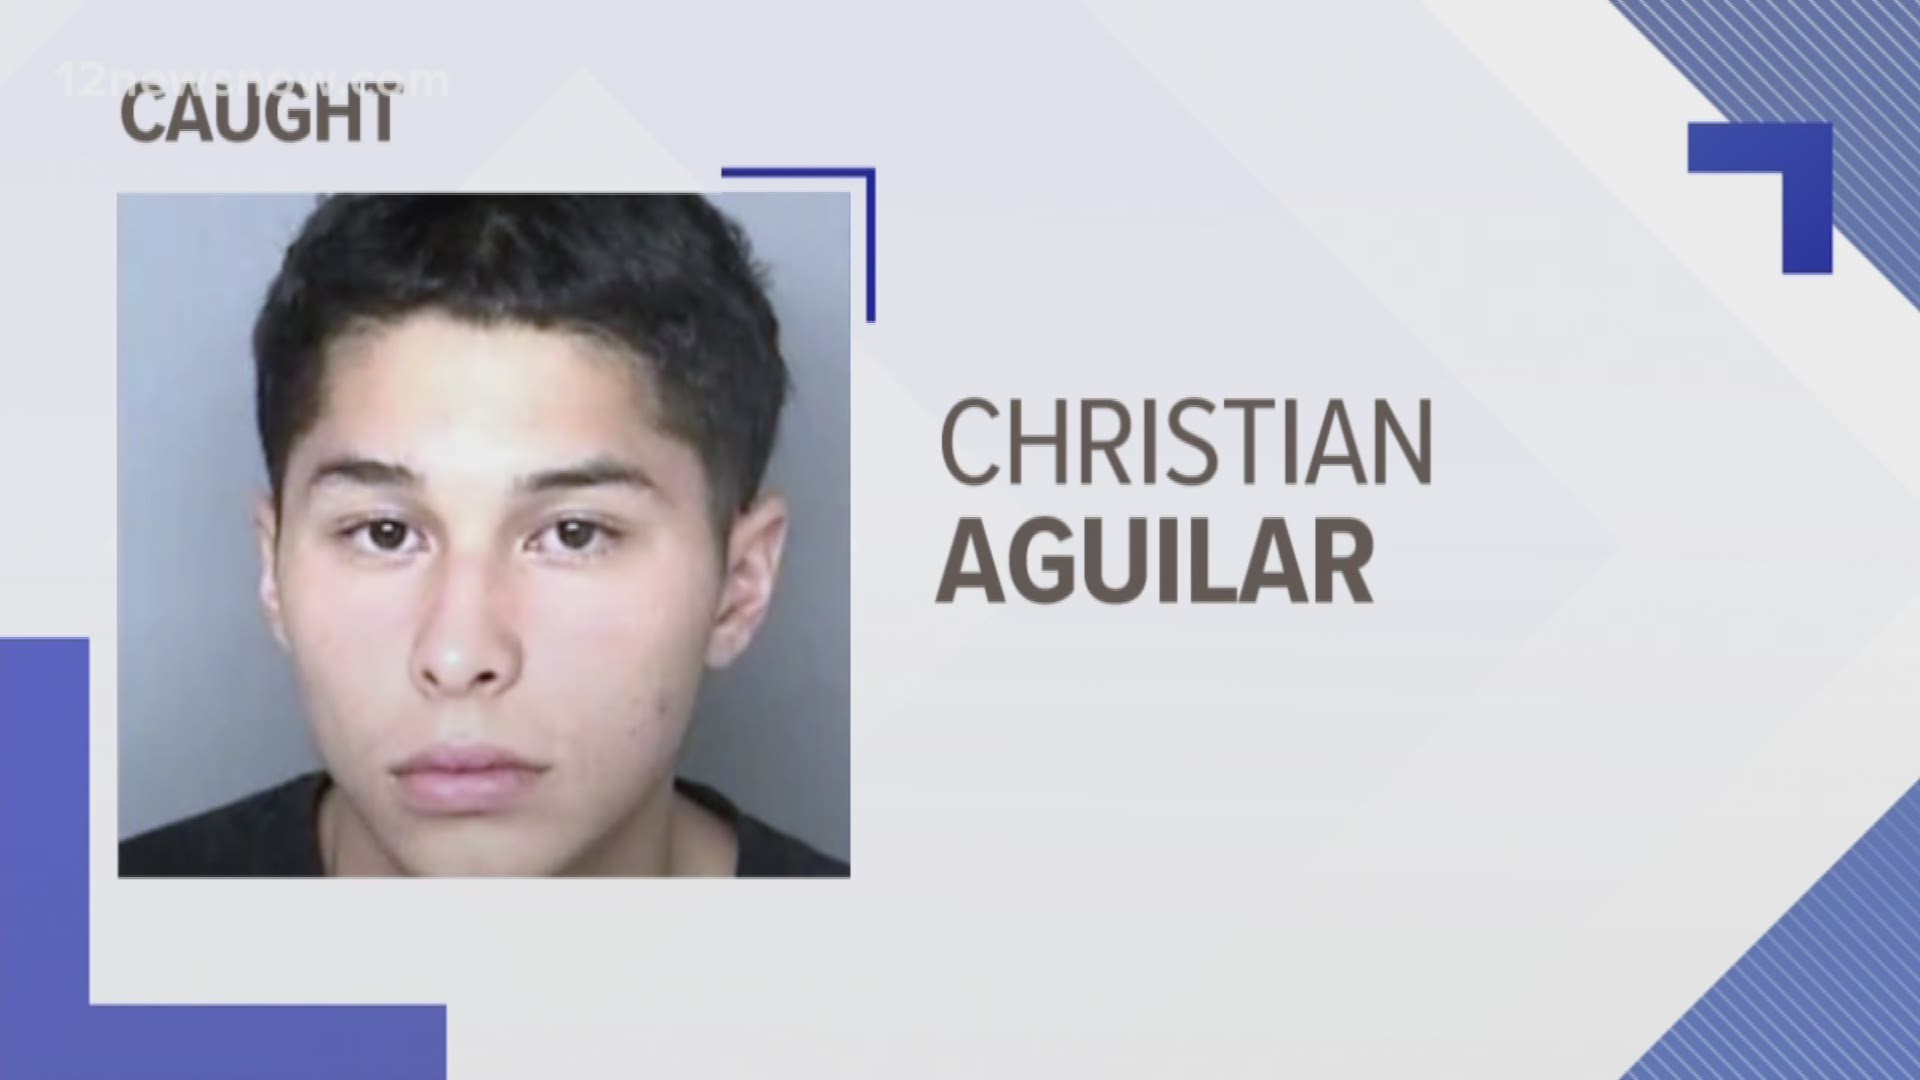 Christian Aguilar was arrested in Duval County.